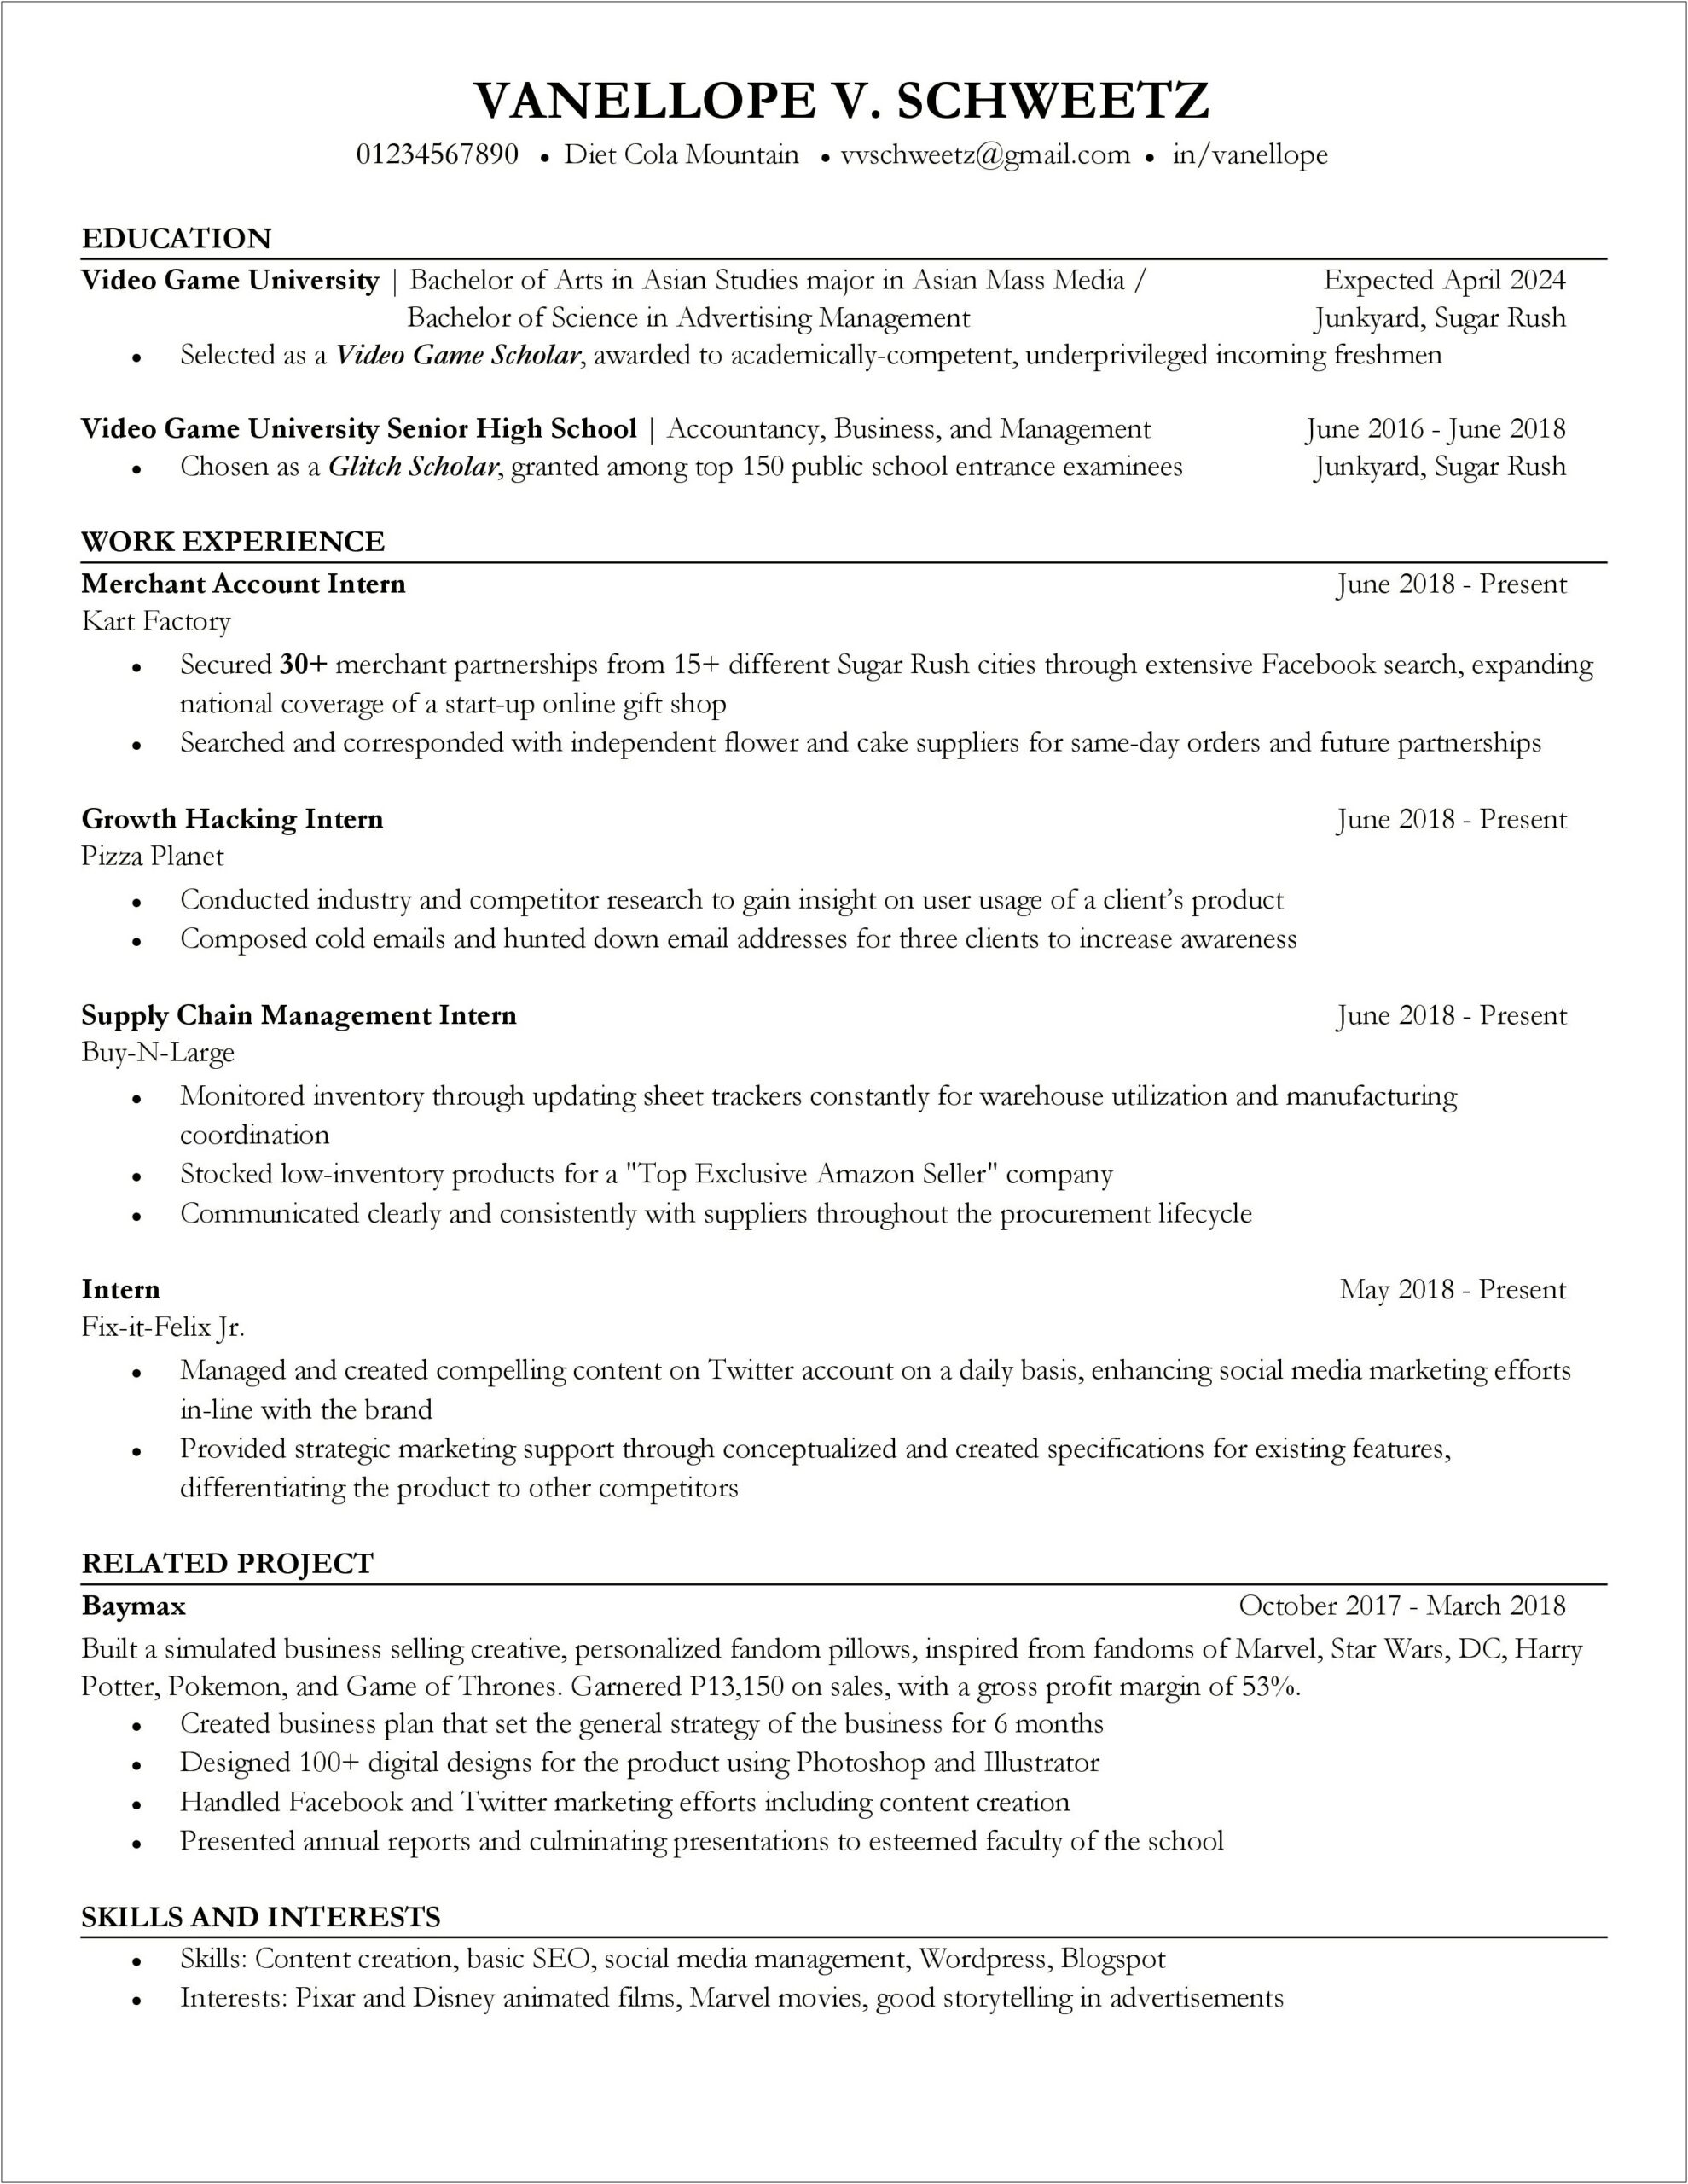 Amazon Independent Contractor Job Description For Resume